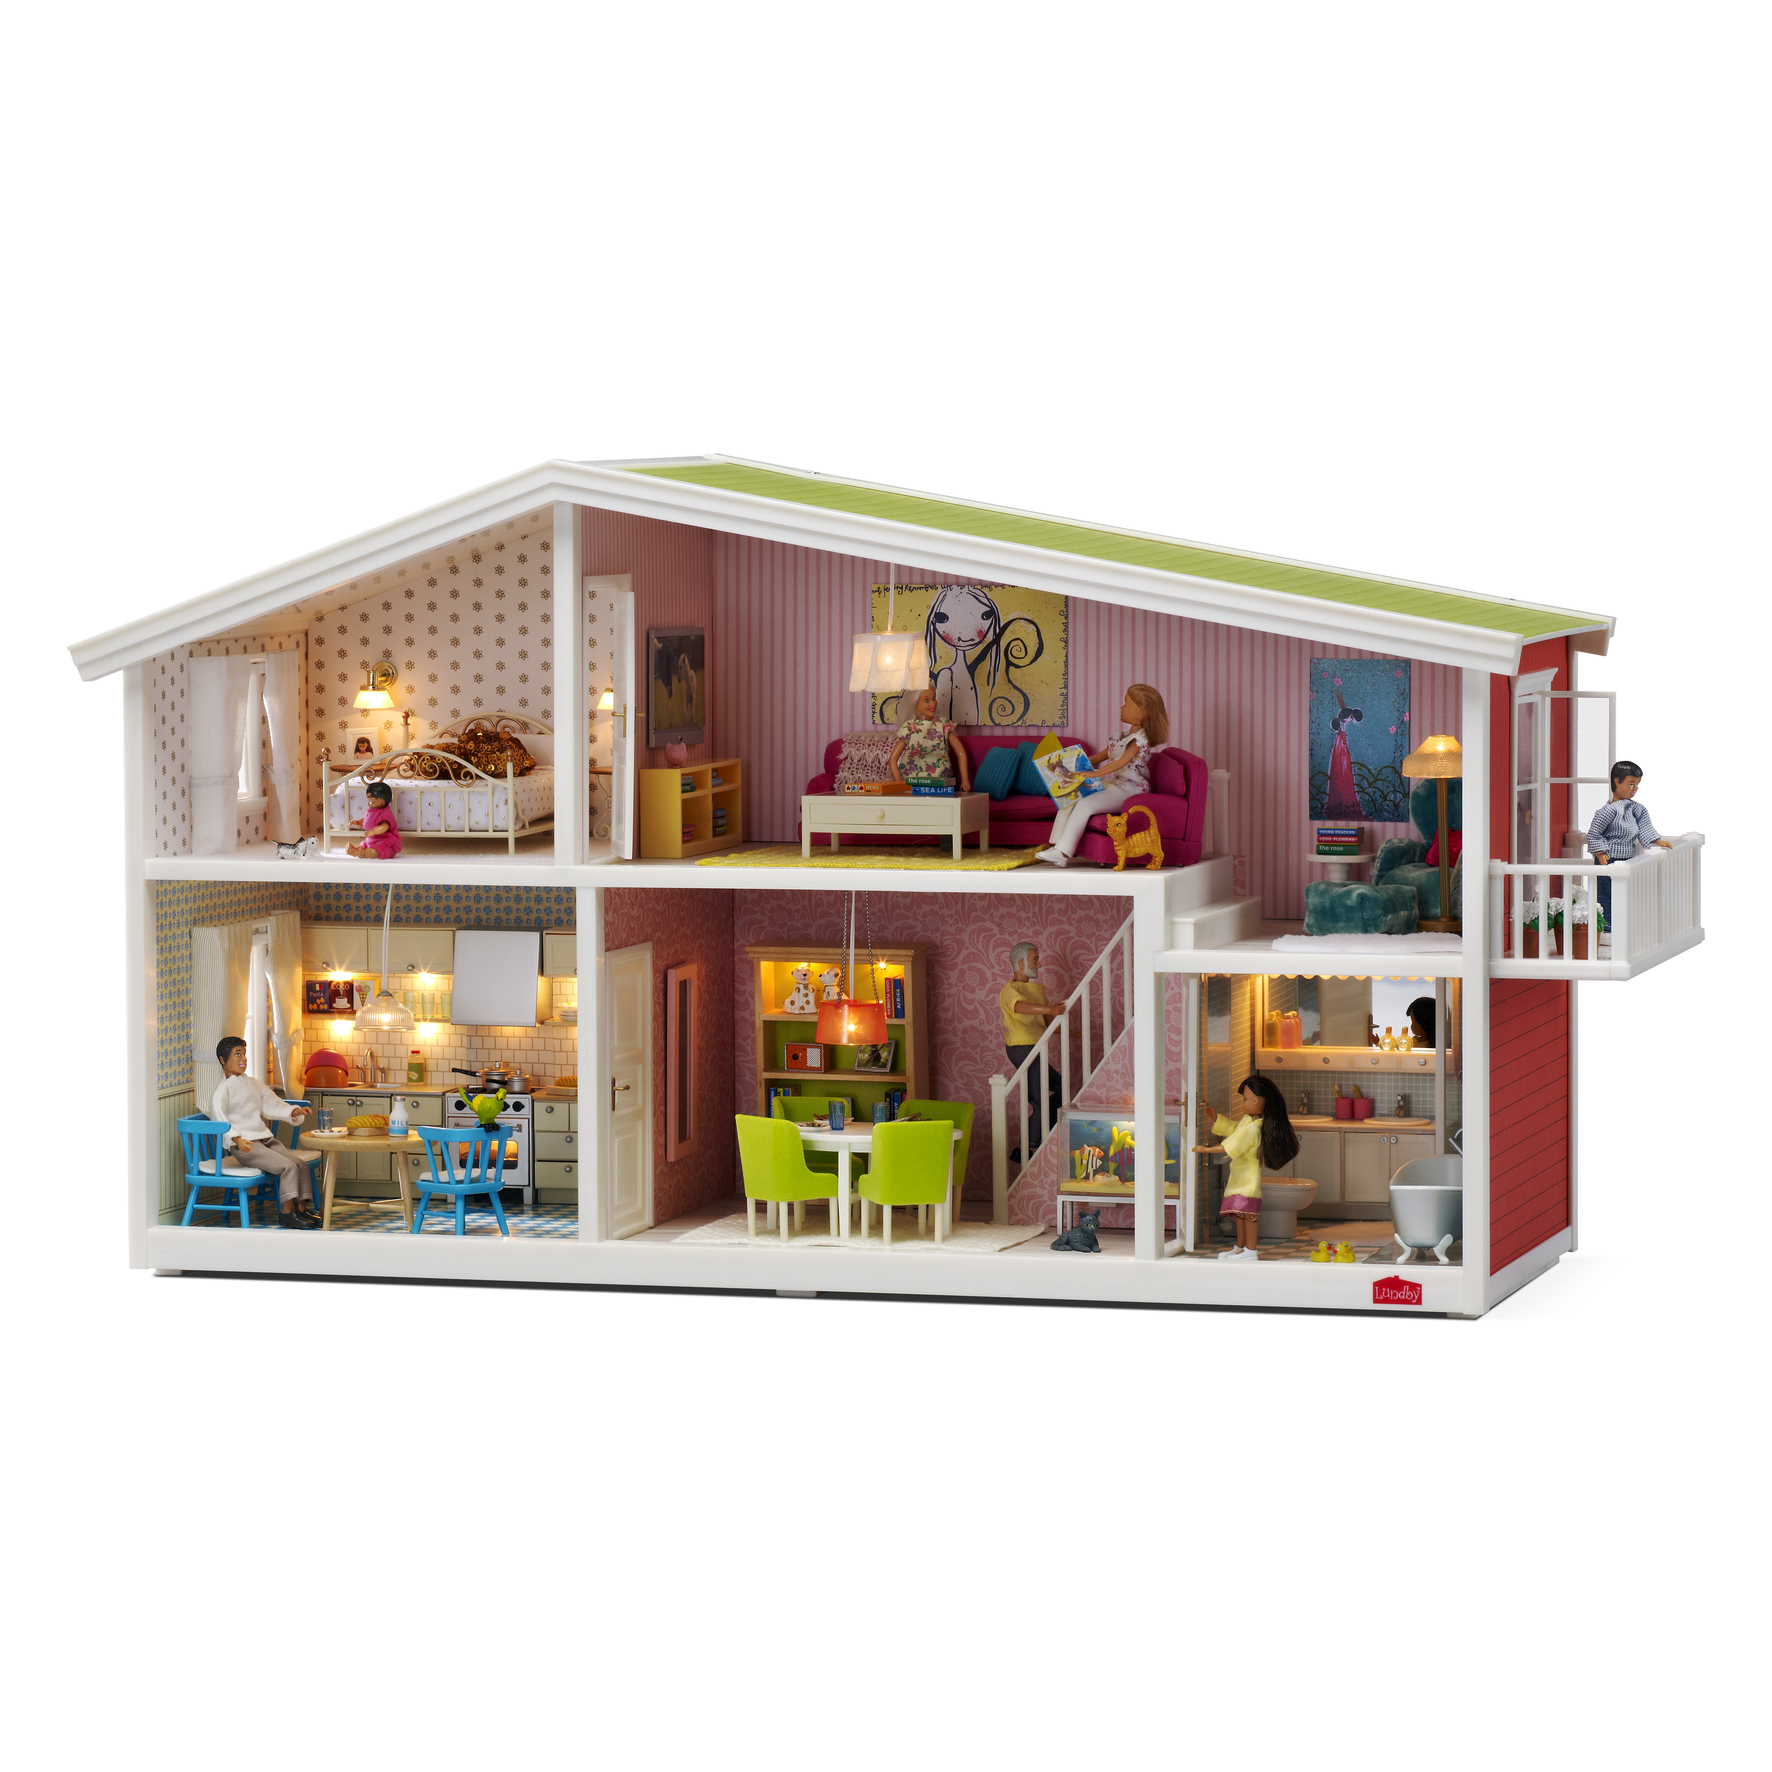 Dad and two kids Mum Classic Lundby Doll's House Doll Family Playset 